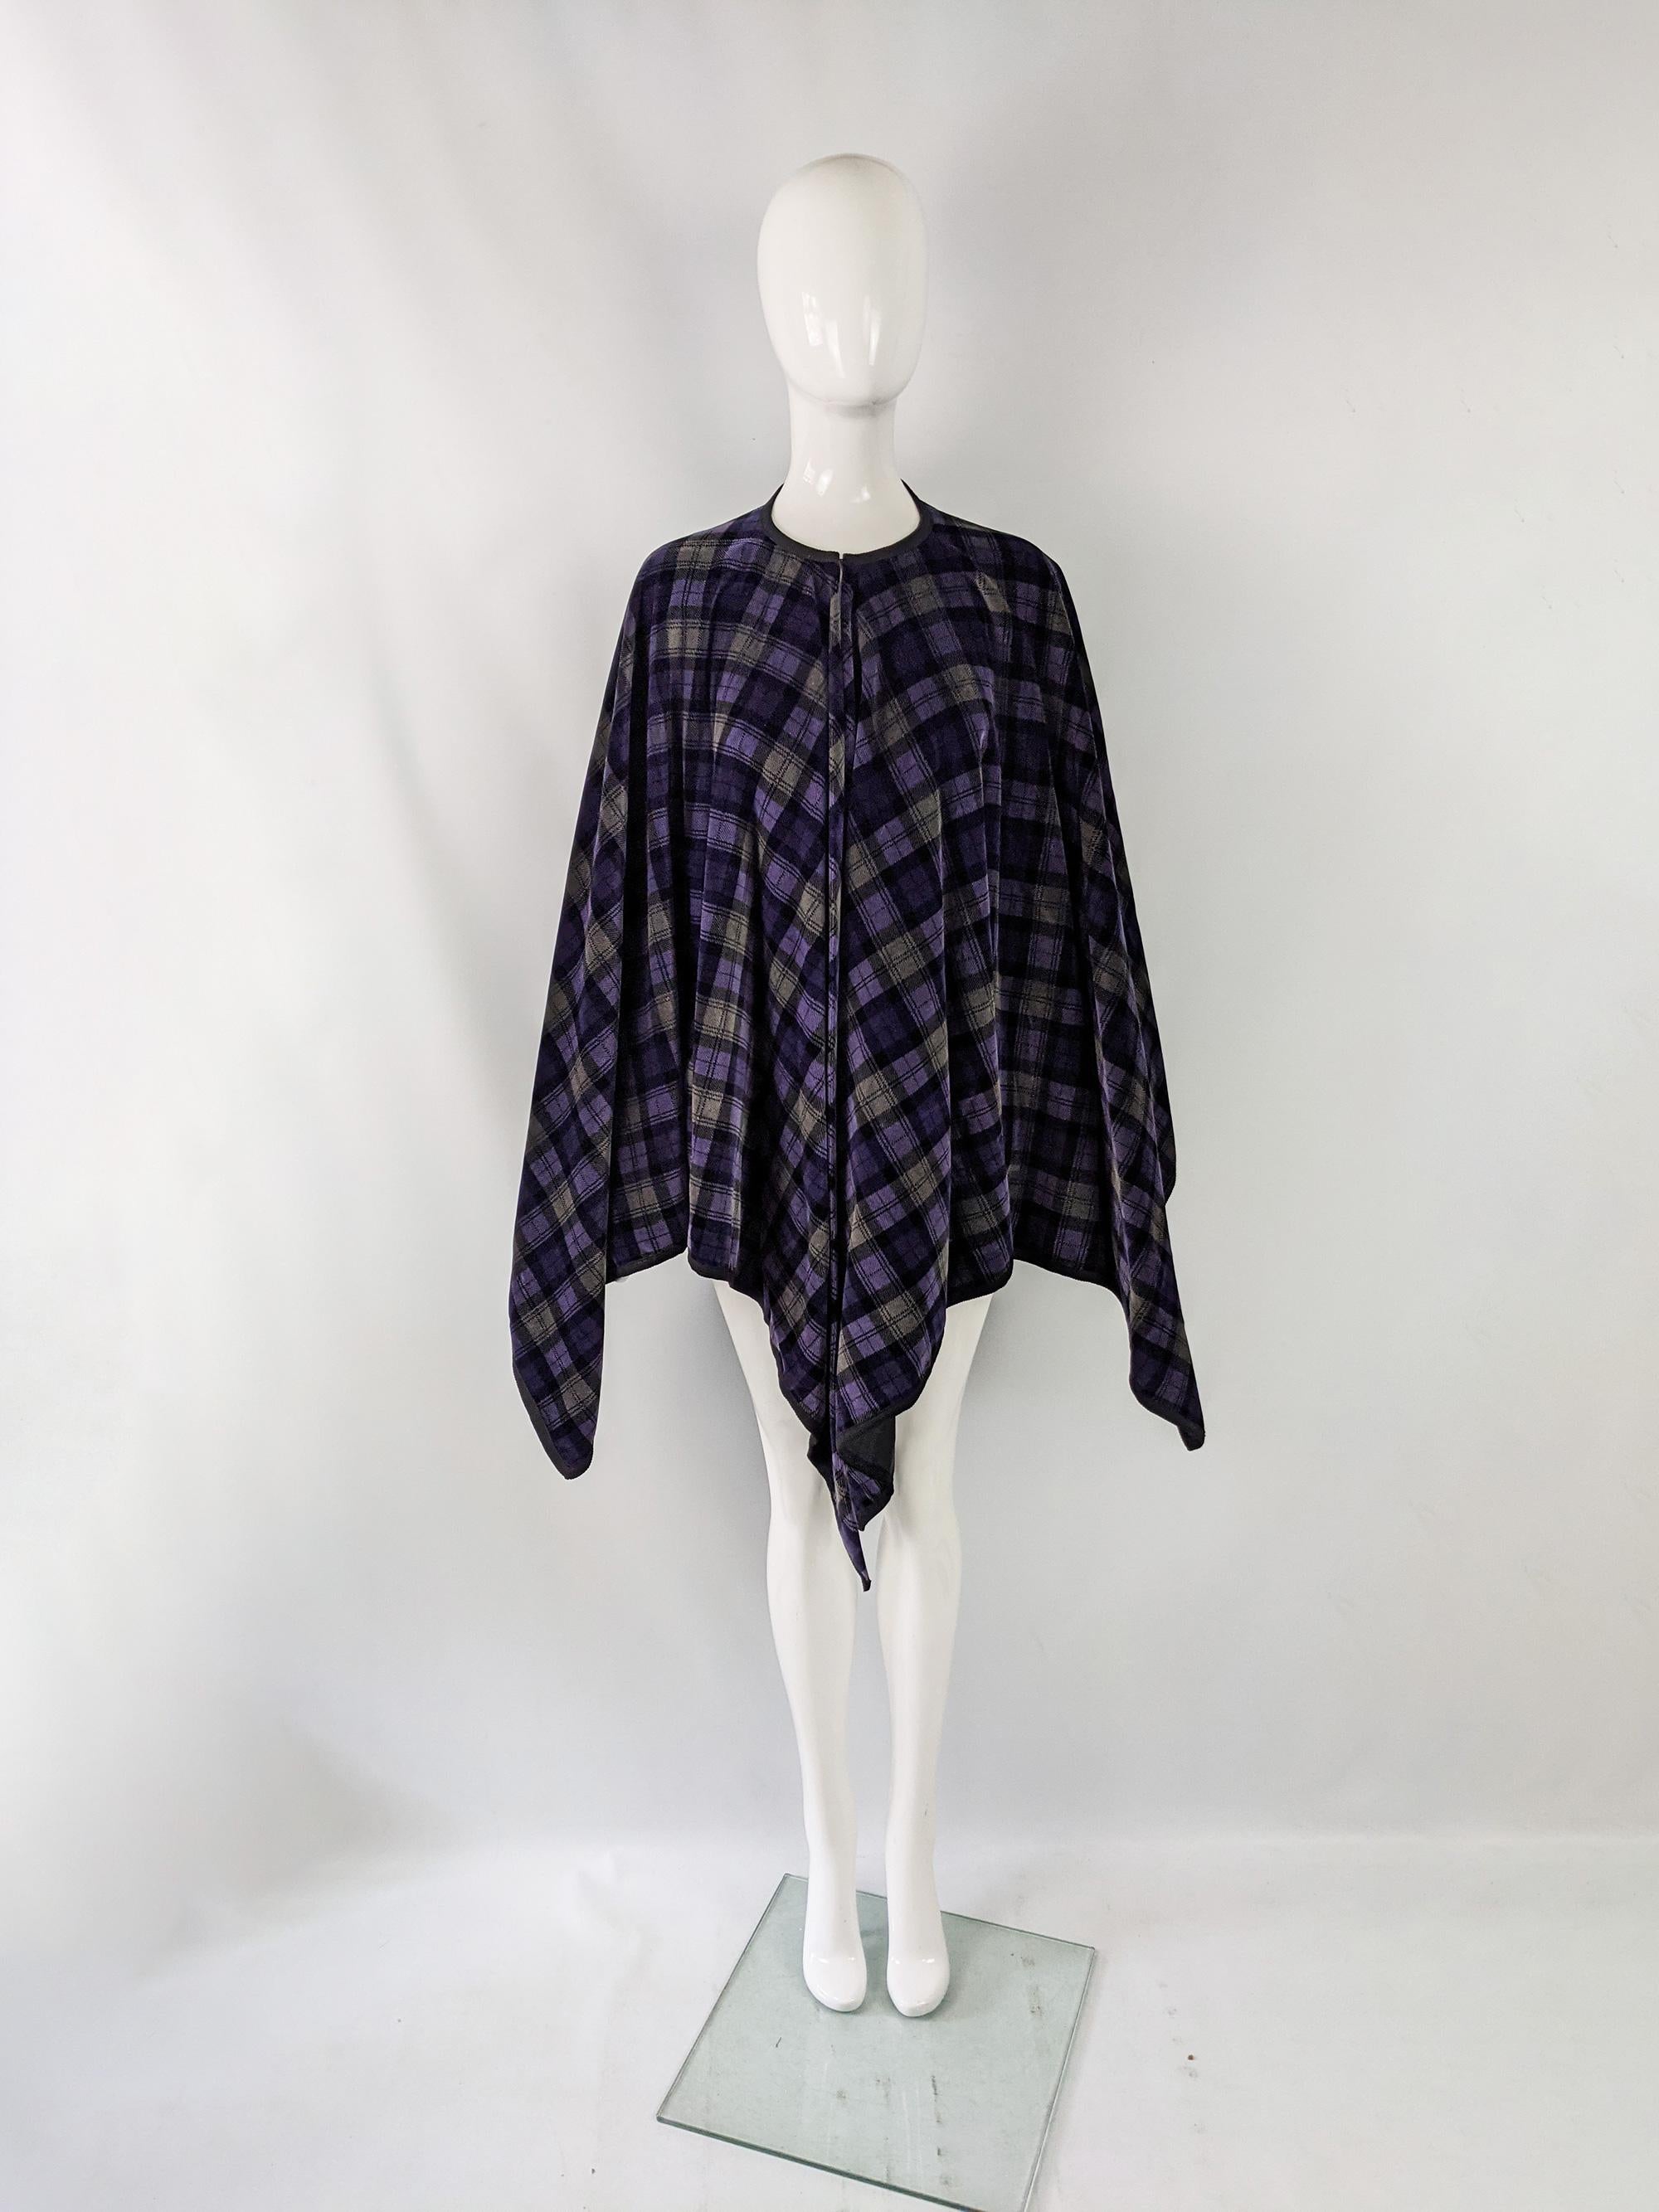 A fabulous vintage womens cape from the 70s by British boutique designer, Annie Gough. Made from yards of a tartan / plaid checked velvet which gives it a full look, with a single hook and eye at the neck. 

Size: Marked vintage UK 14 but really one